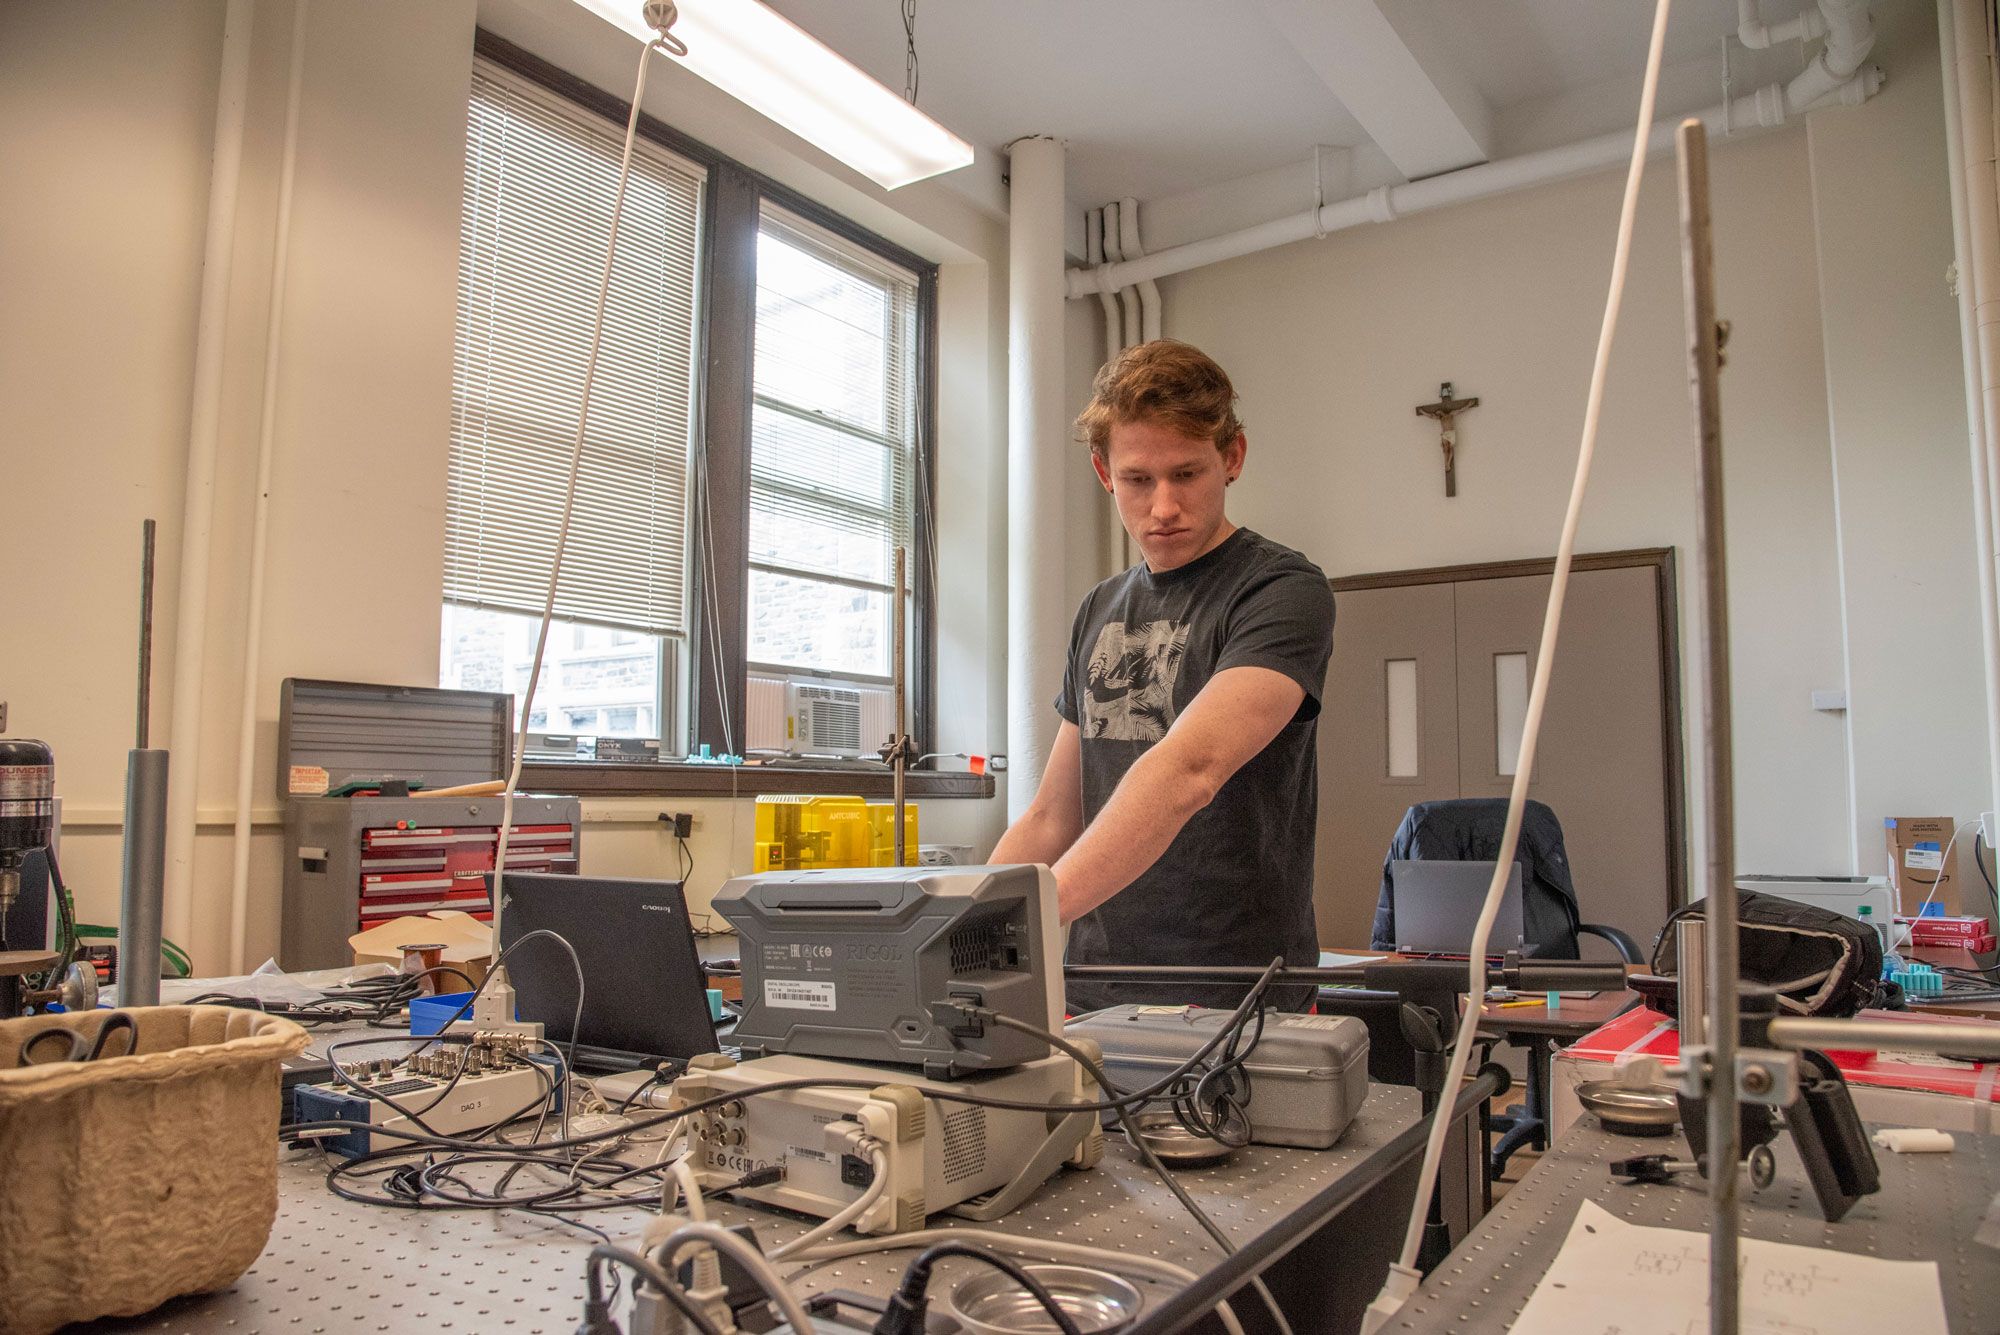 Jackson Saunders working on his acoustics project in a lab at the Rose Hill campus